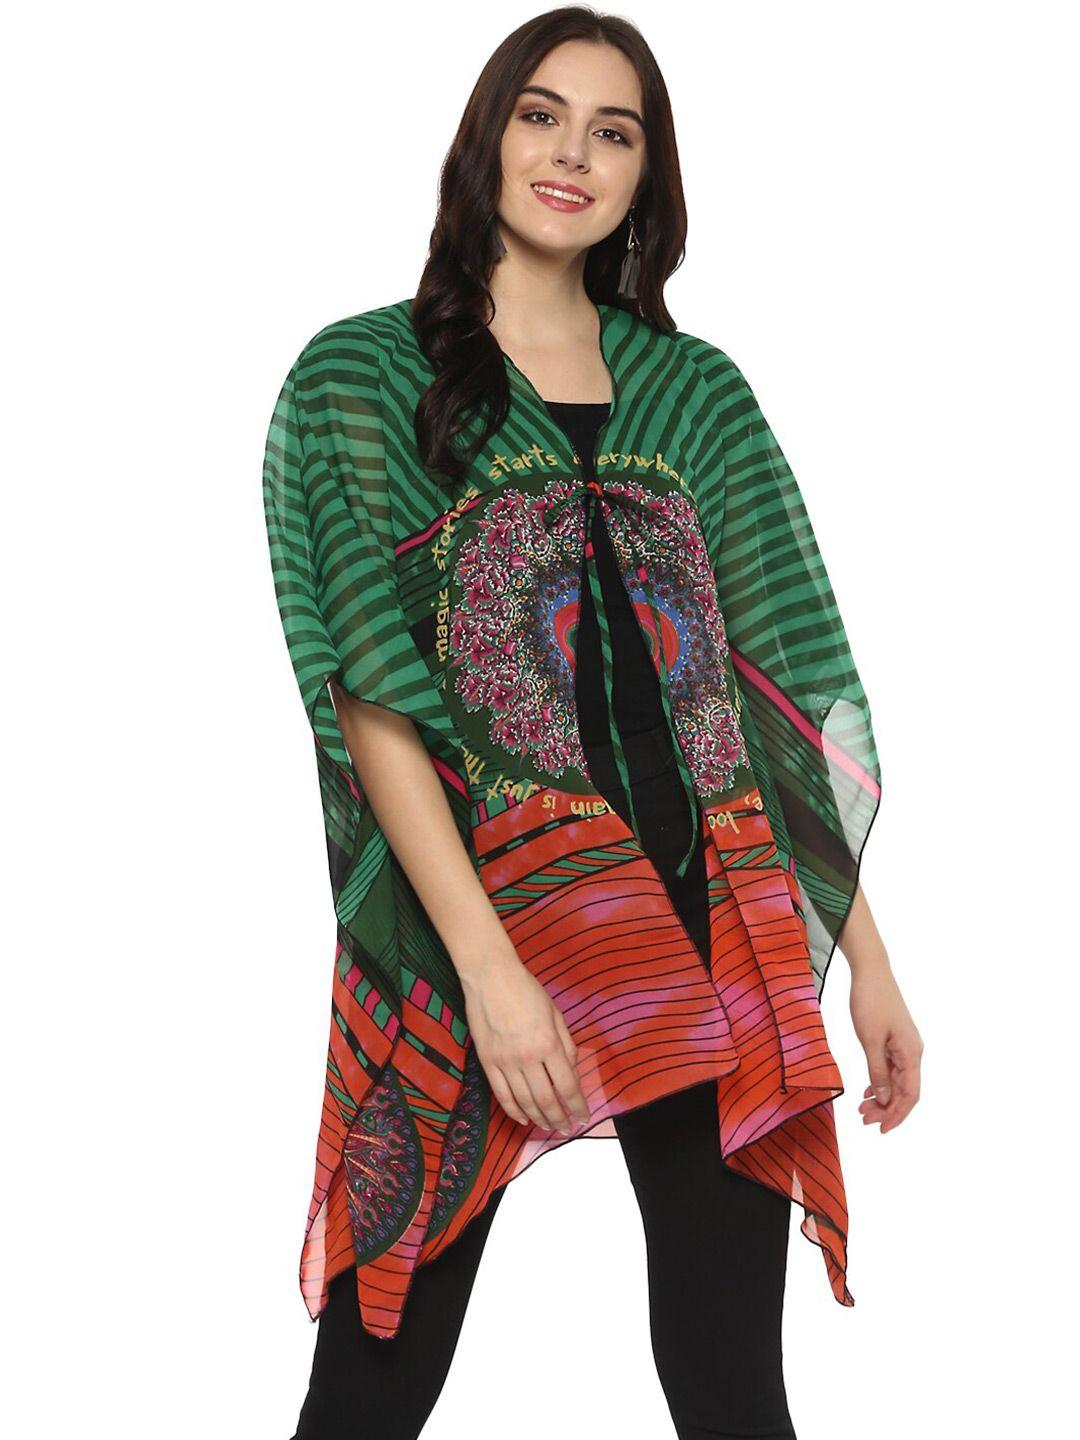 stylestone-women-green-&-red-abstract-printed-longline-tie-up-shrug